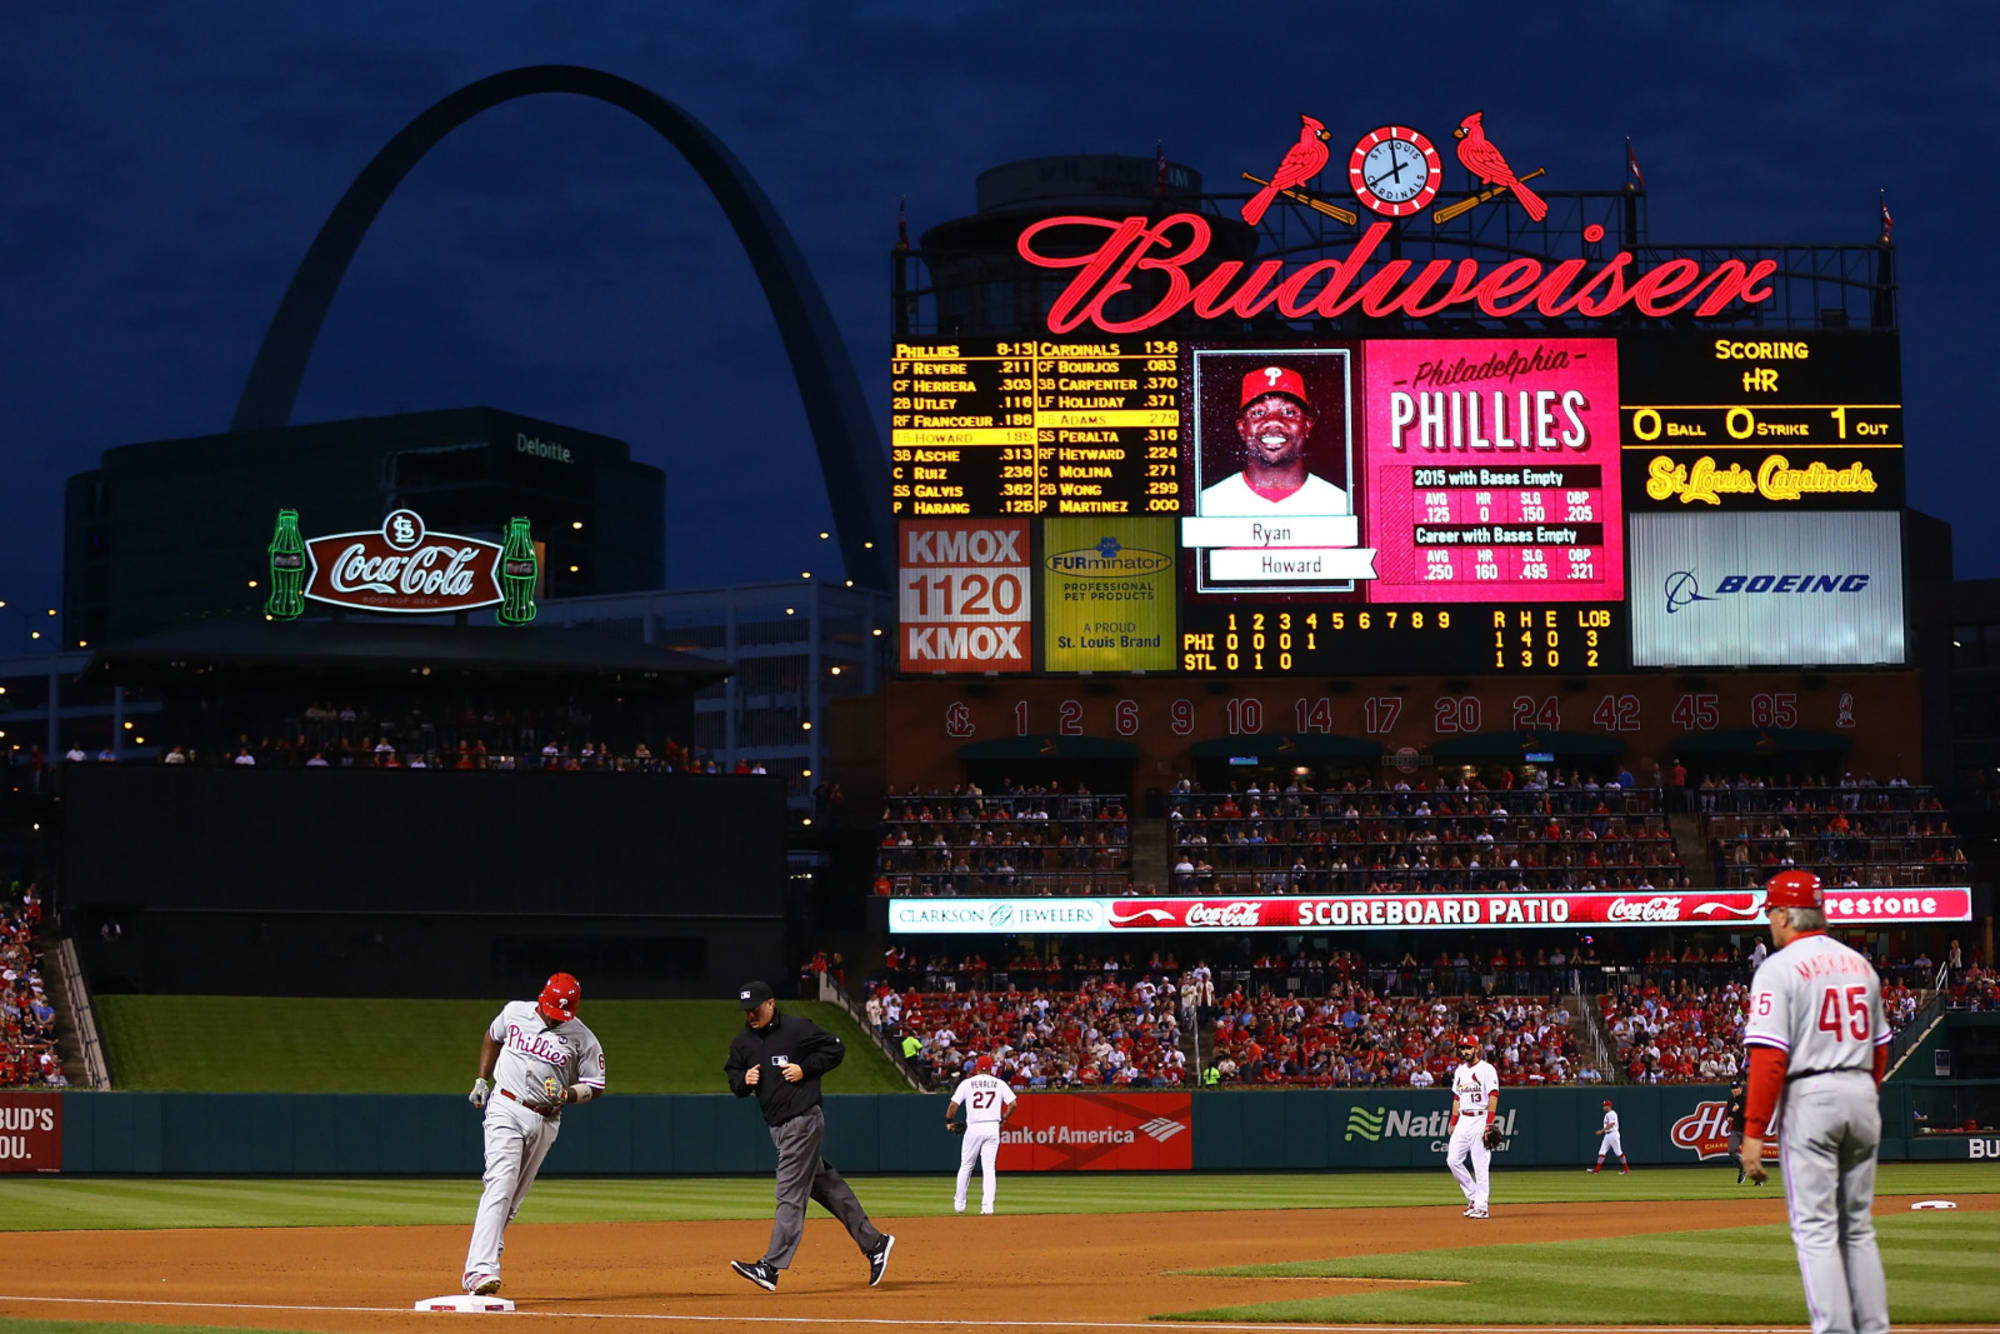 Philadelphia Phillies vs St. Louis Cardinals: How to watch online, TV, lineups, and more